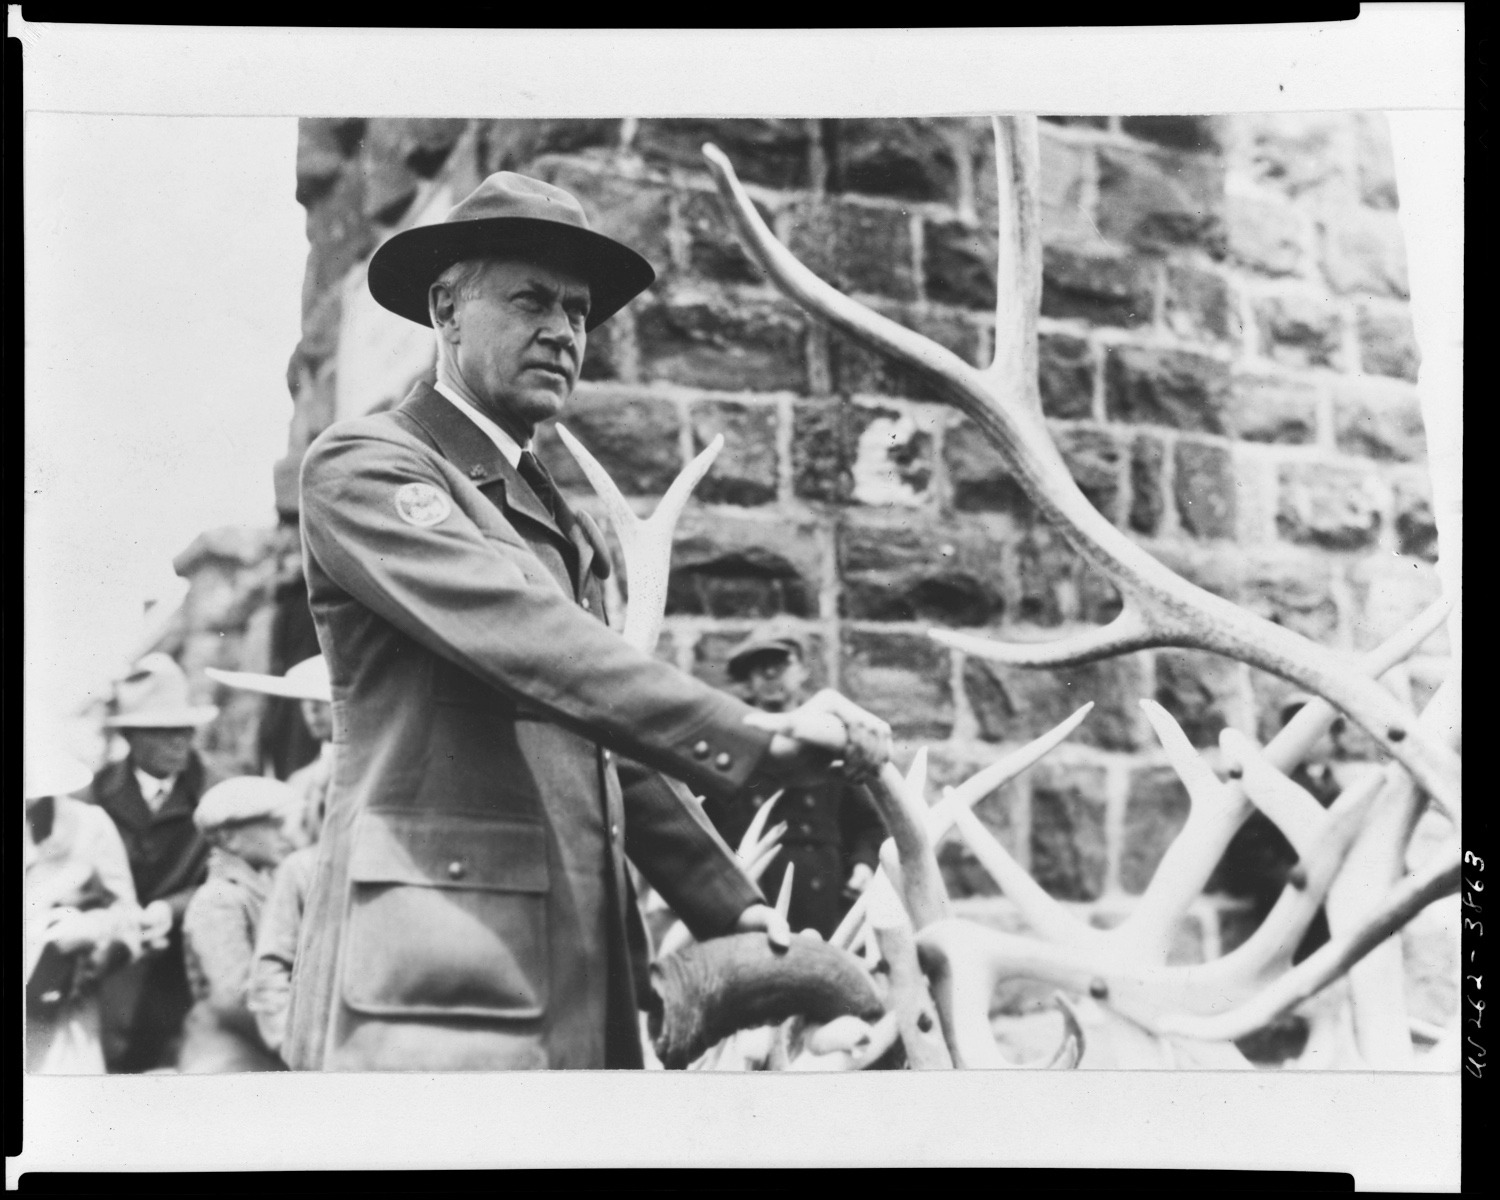 National Park Service Director Stephen T. Mather who initially was supportive of dams being built in Yellowstone to serve private water interests outside the park. 